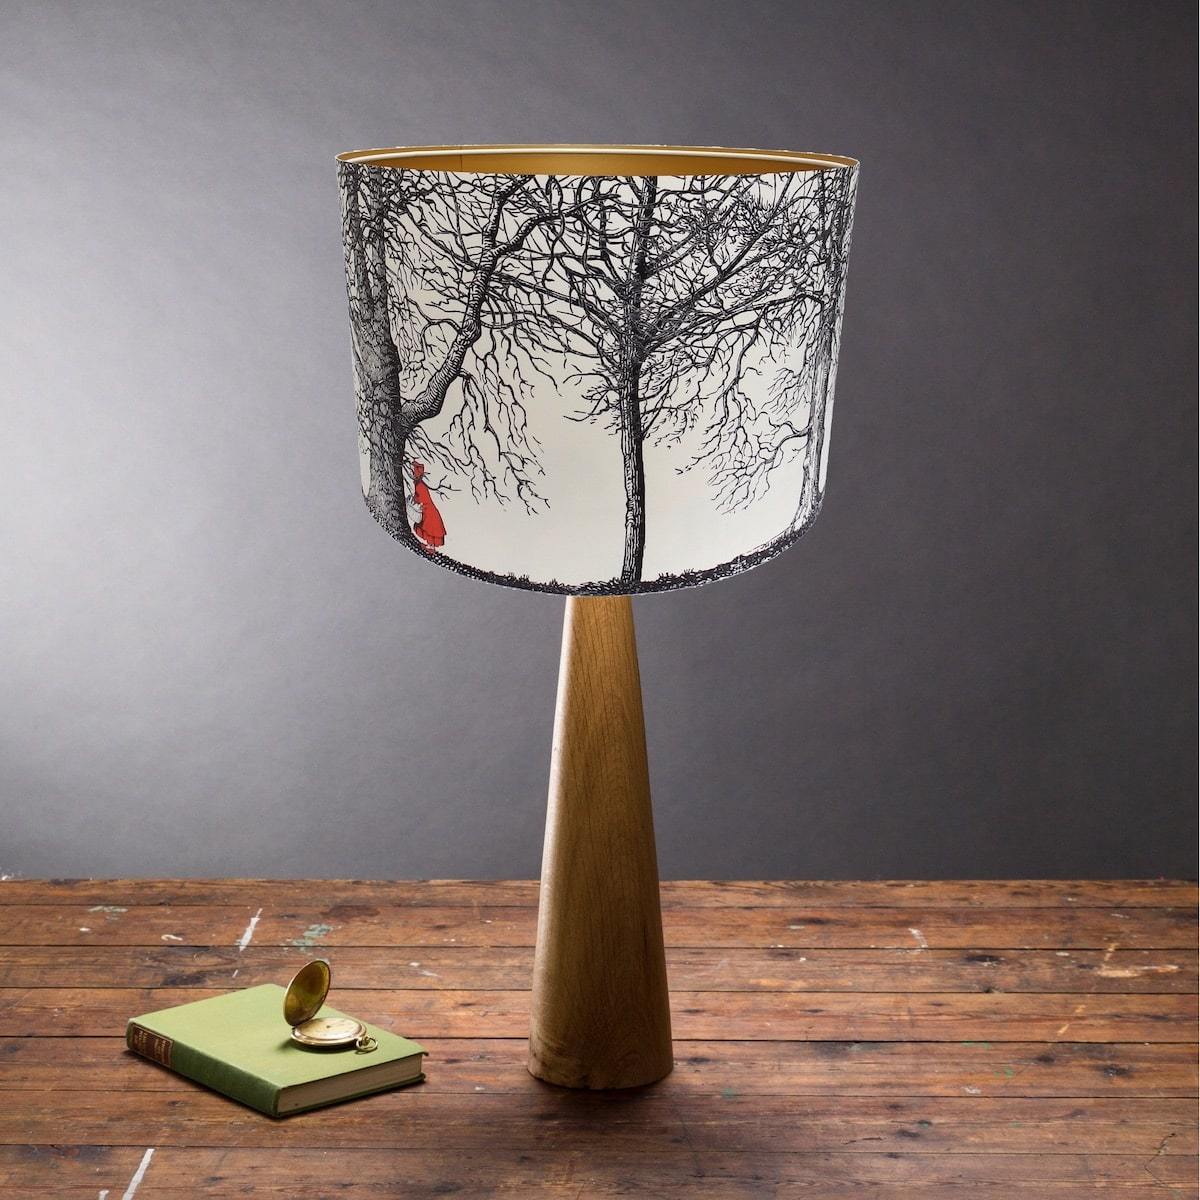 Red Riding Hood Fairytale Lampshade by Mountain & Molehill for AUTHOR's unique collections of British-made home accessories